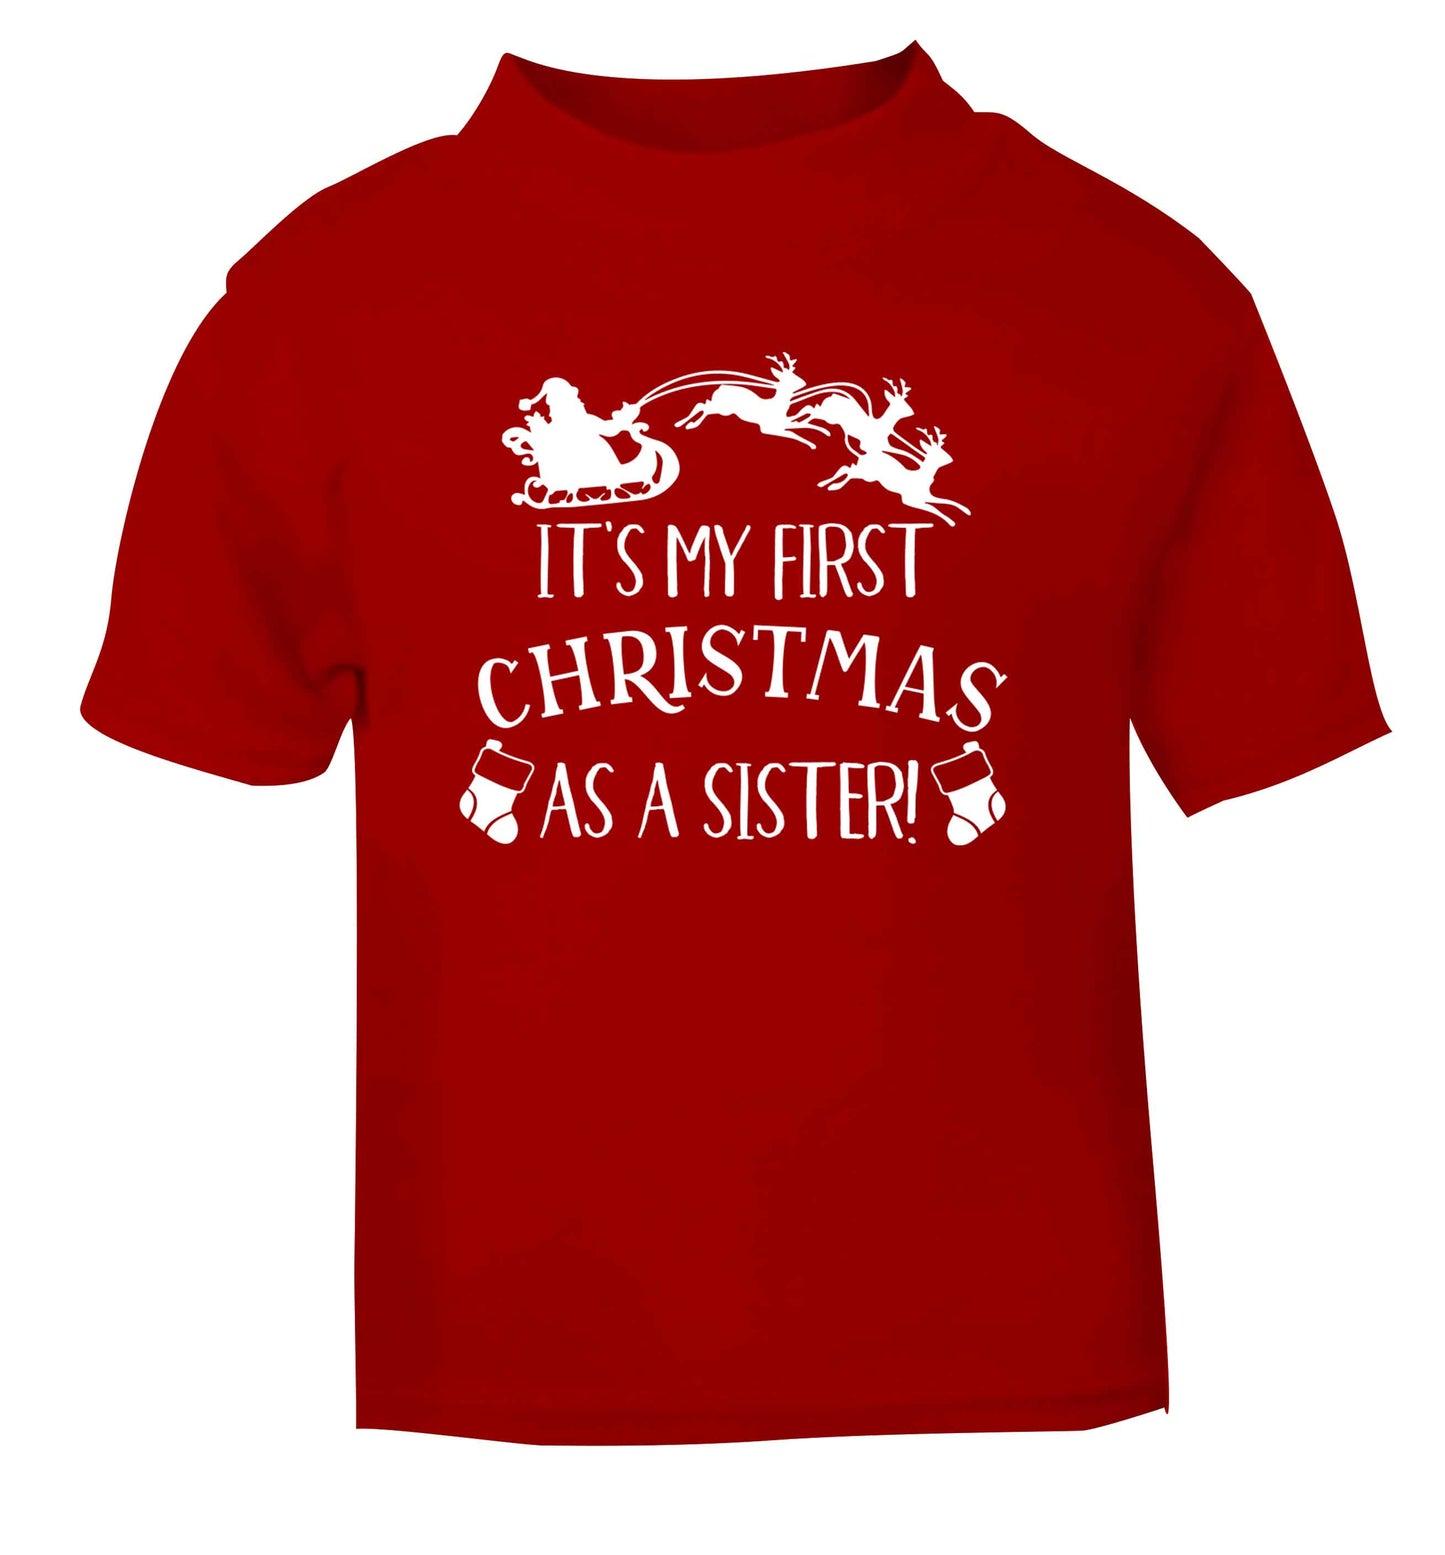 It's my first Christmas as a sister! red Baby Toddler Tshirt 2 Years